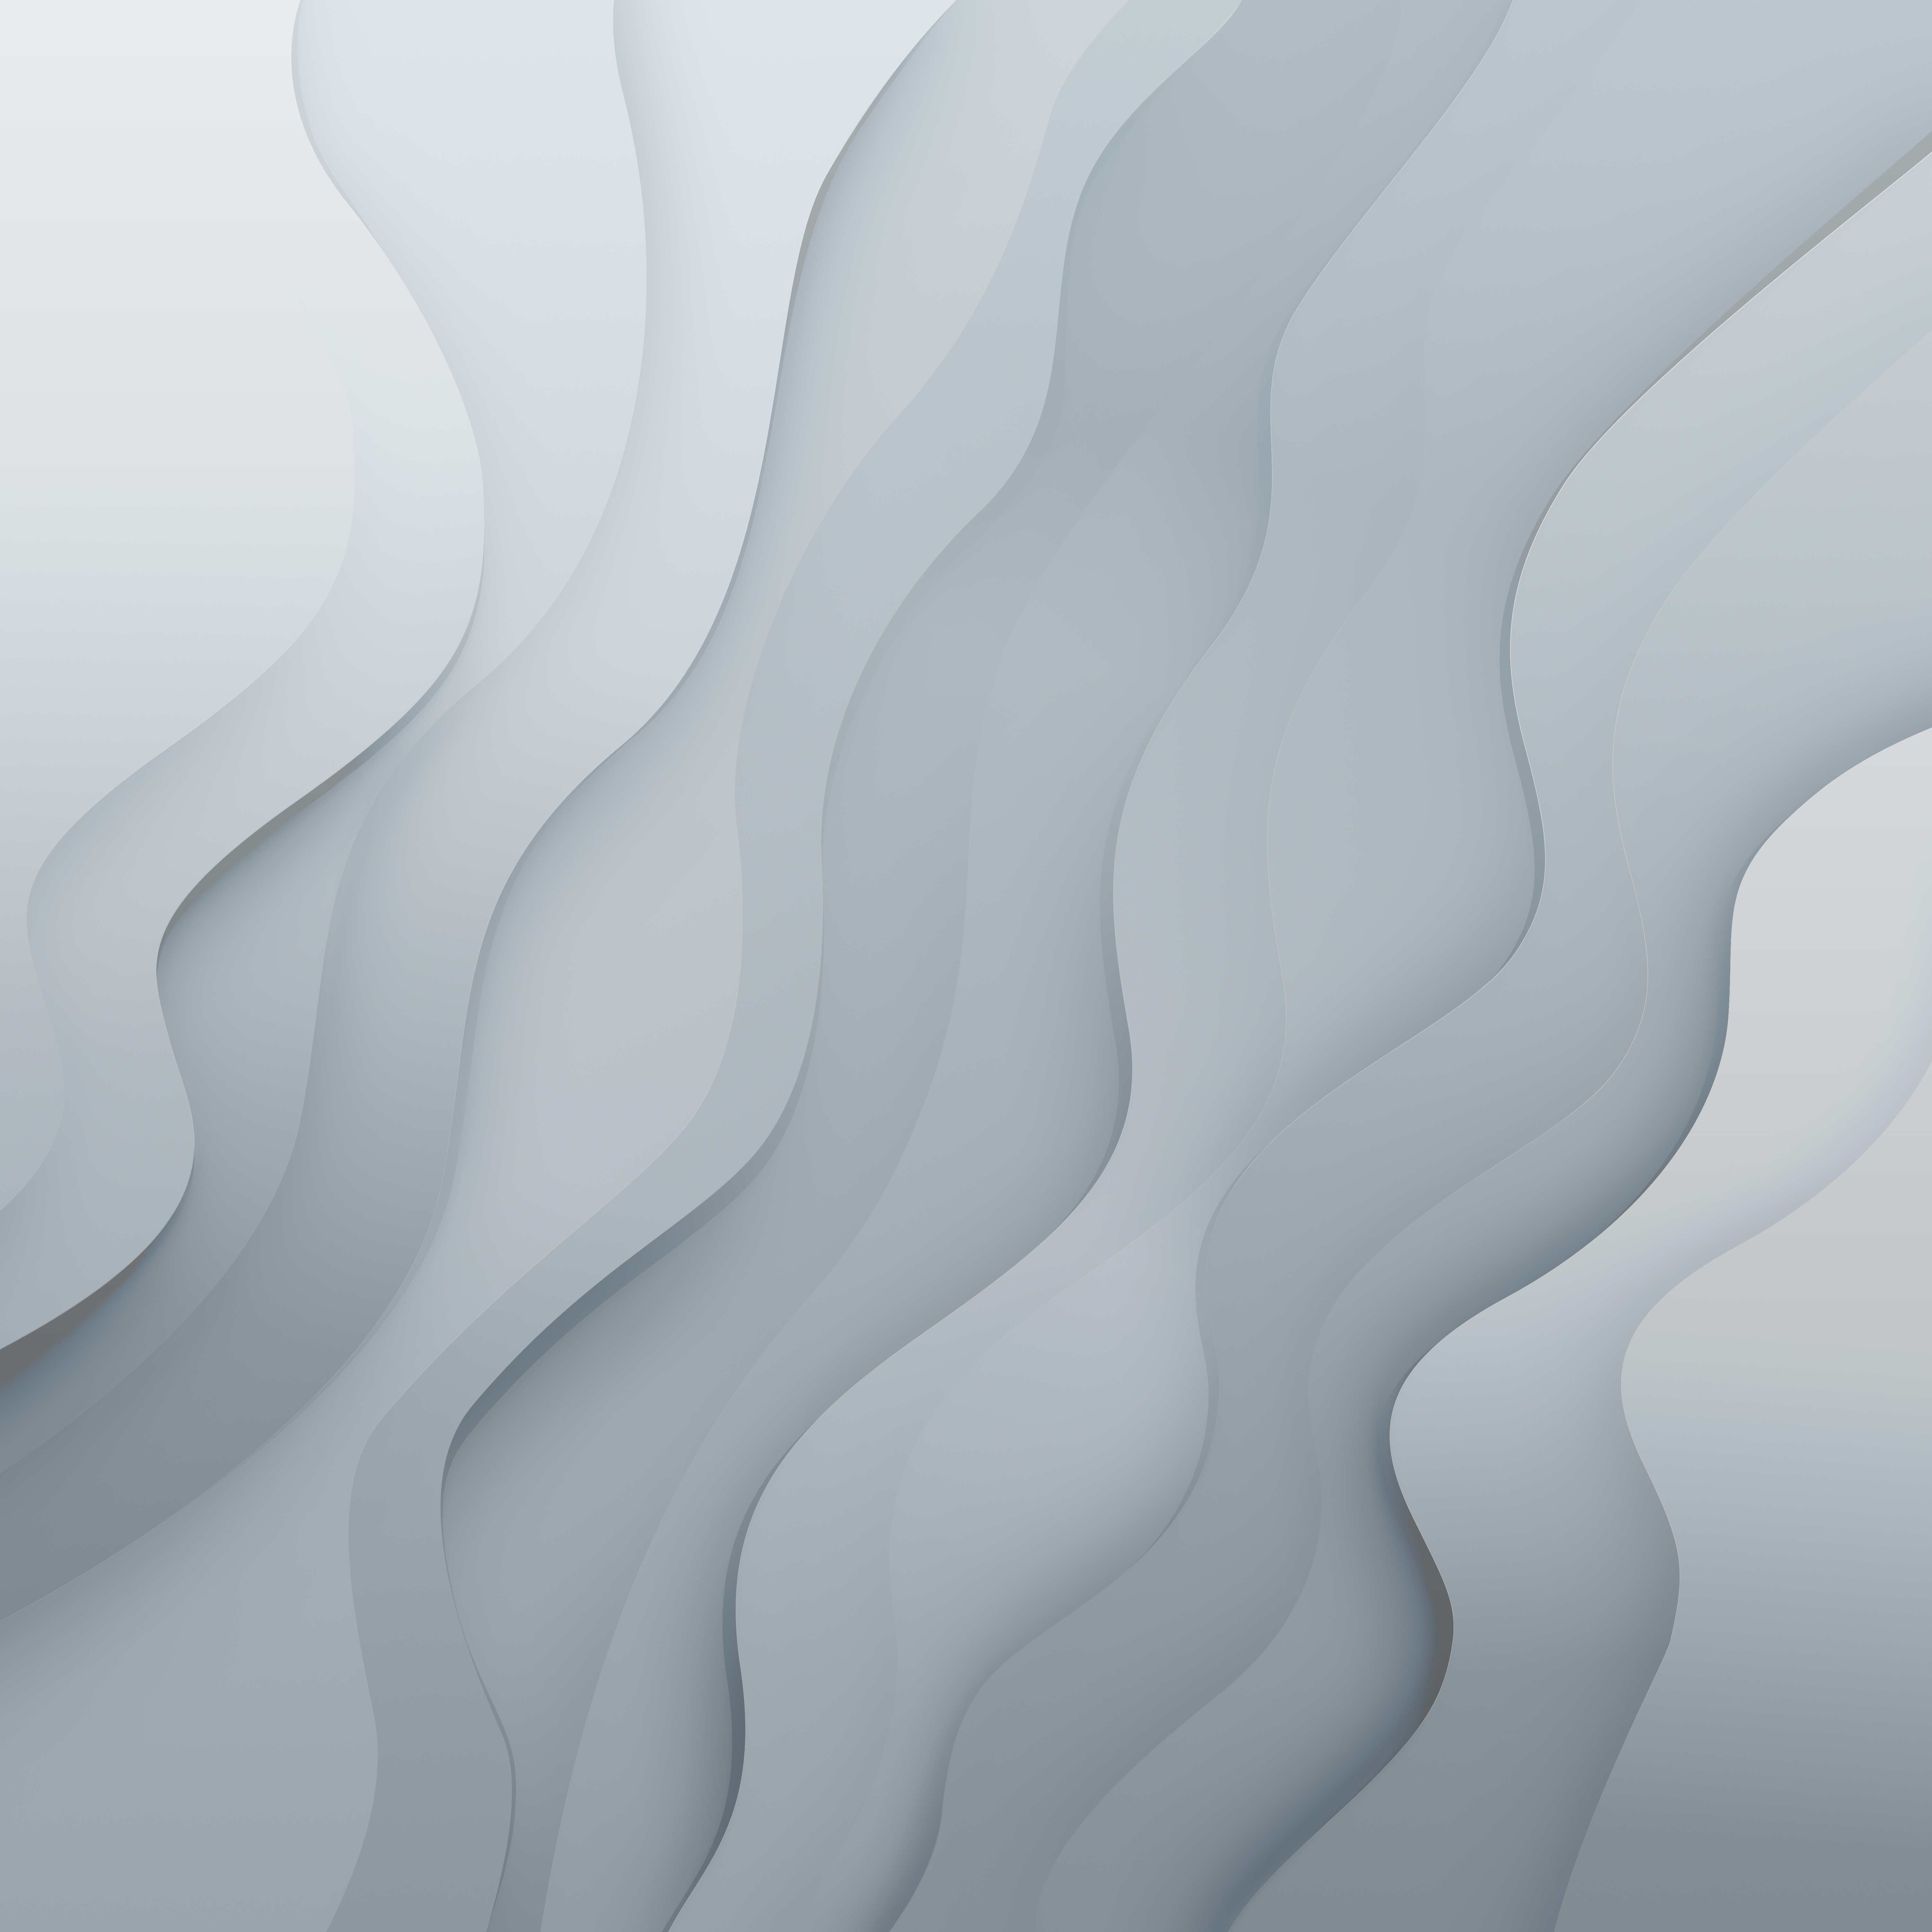 General 6016x6016 waves minimalism simple background white abstract